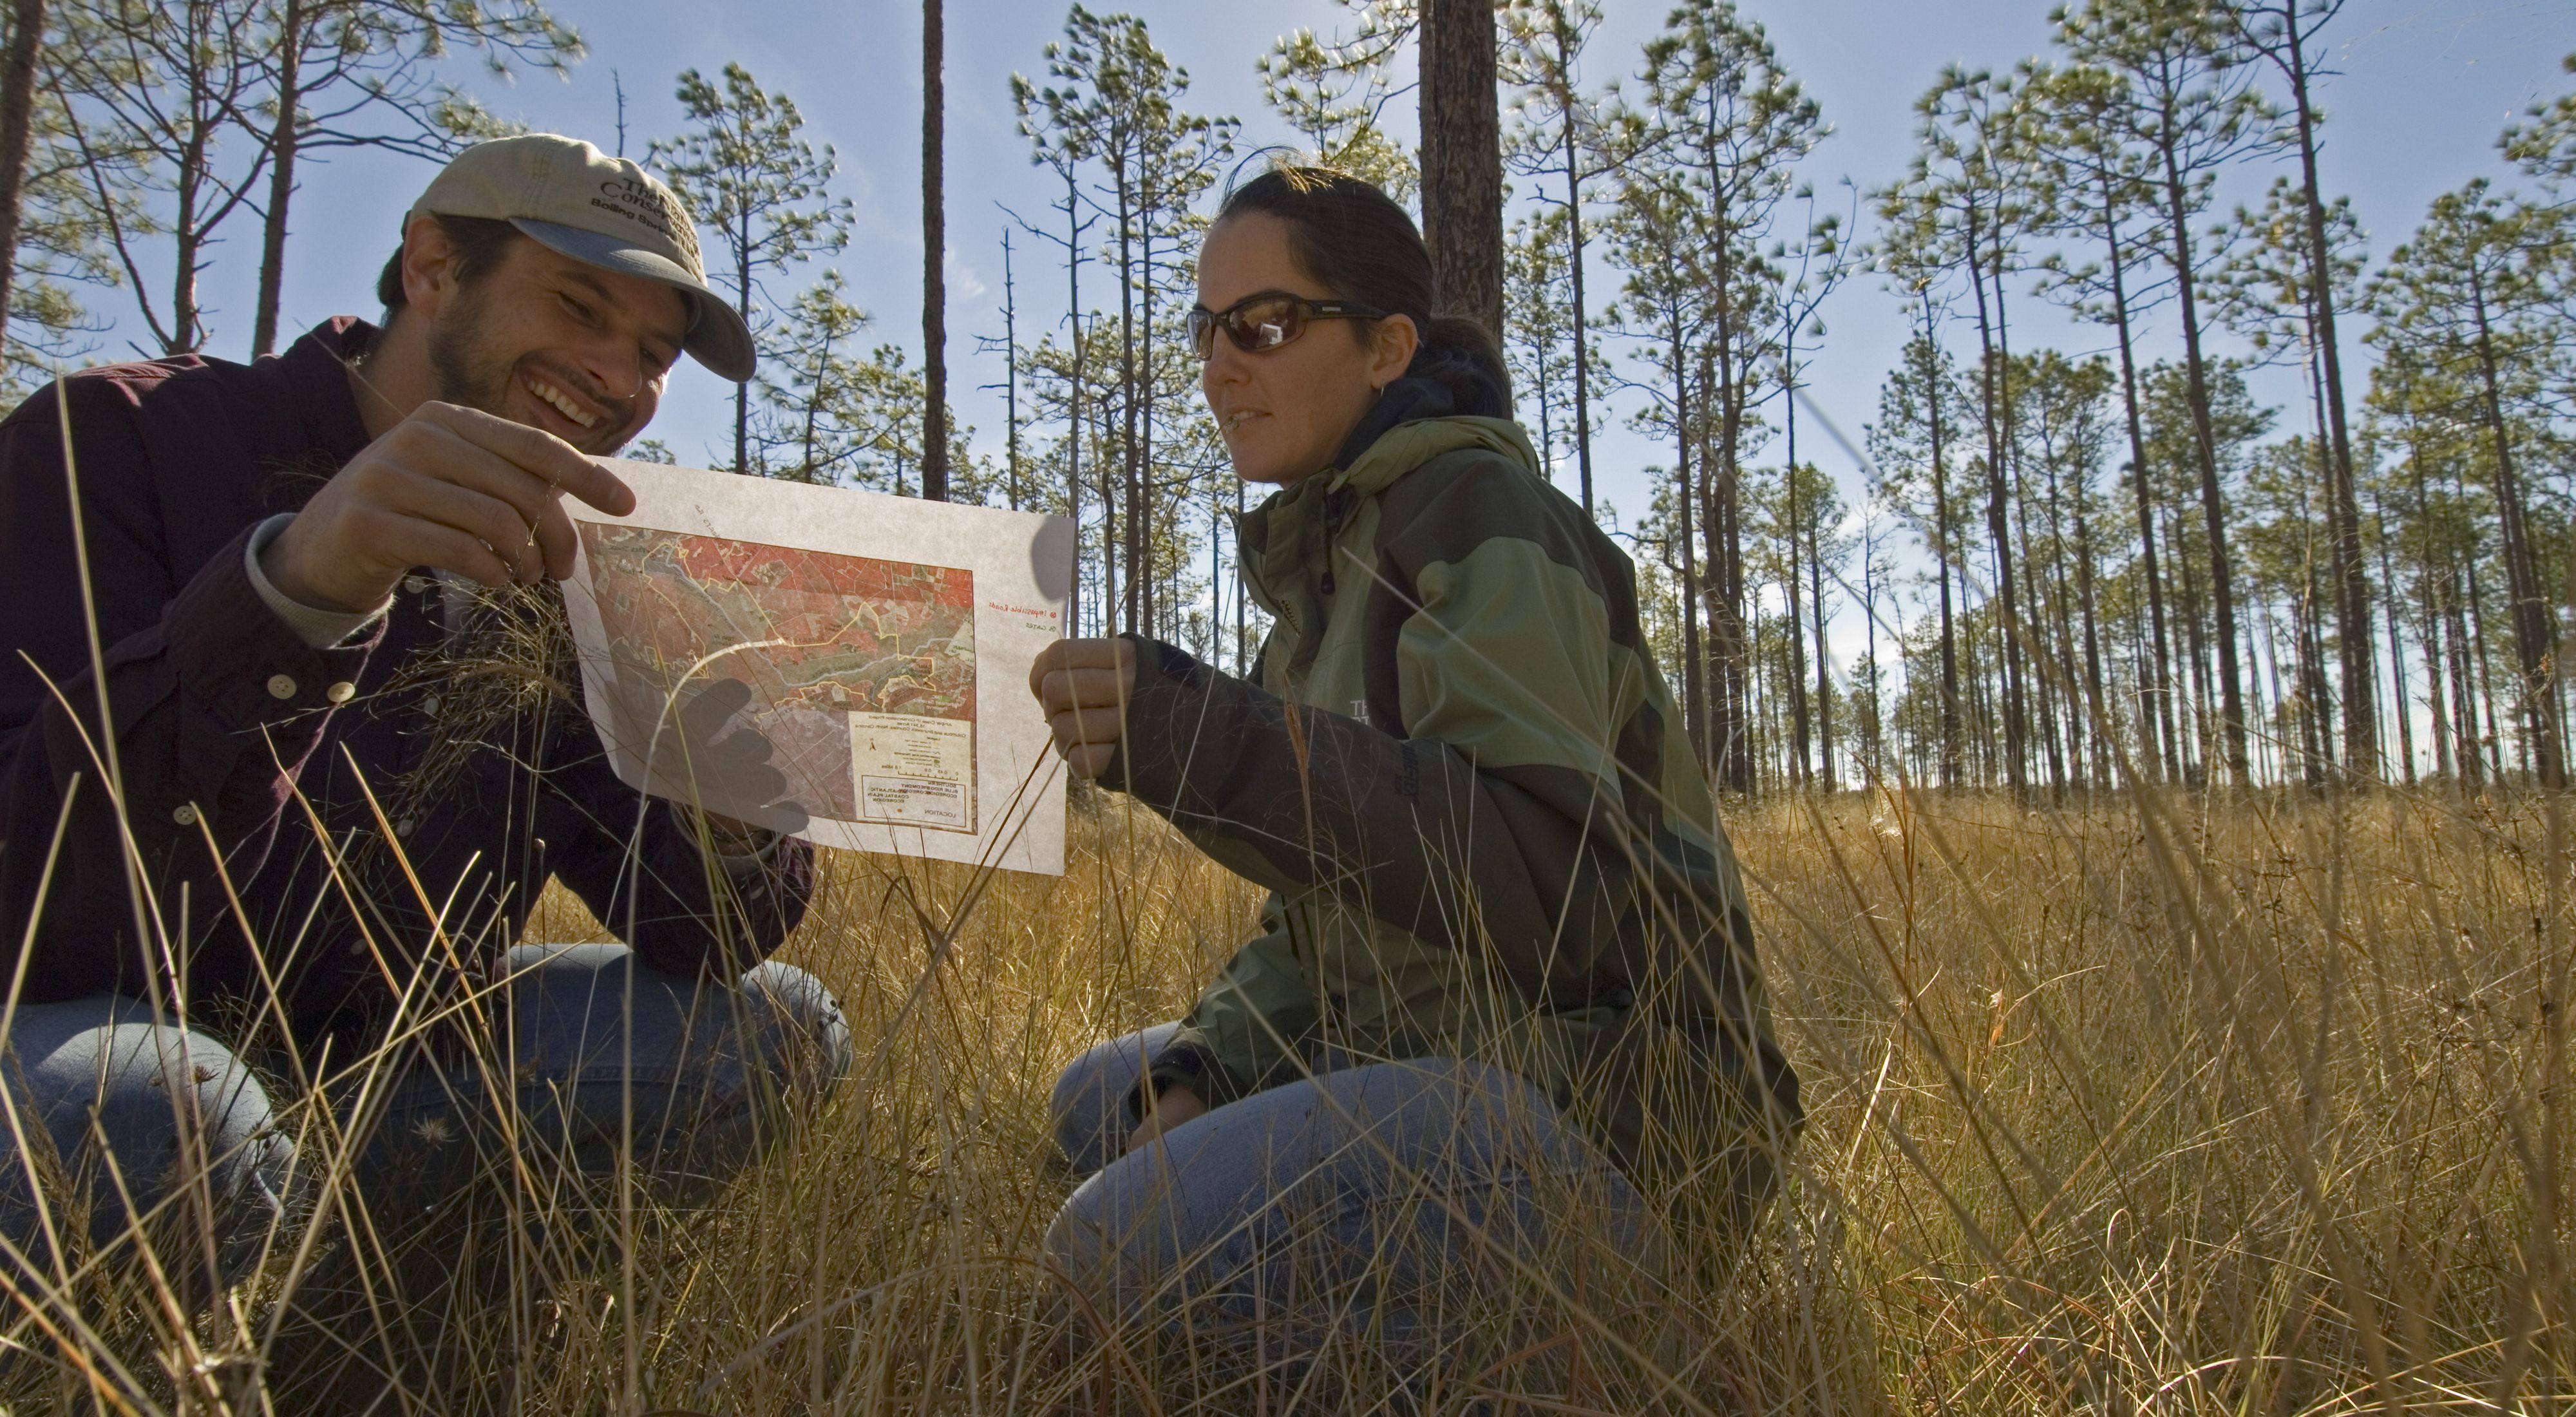 A man and woman crouch to study a map in a North Carolina forest.